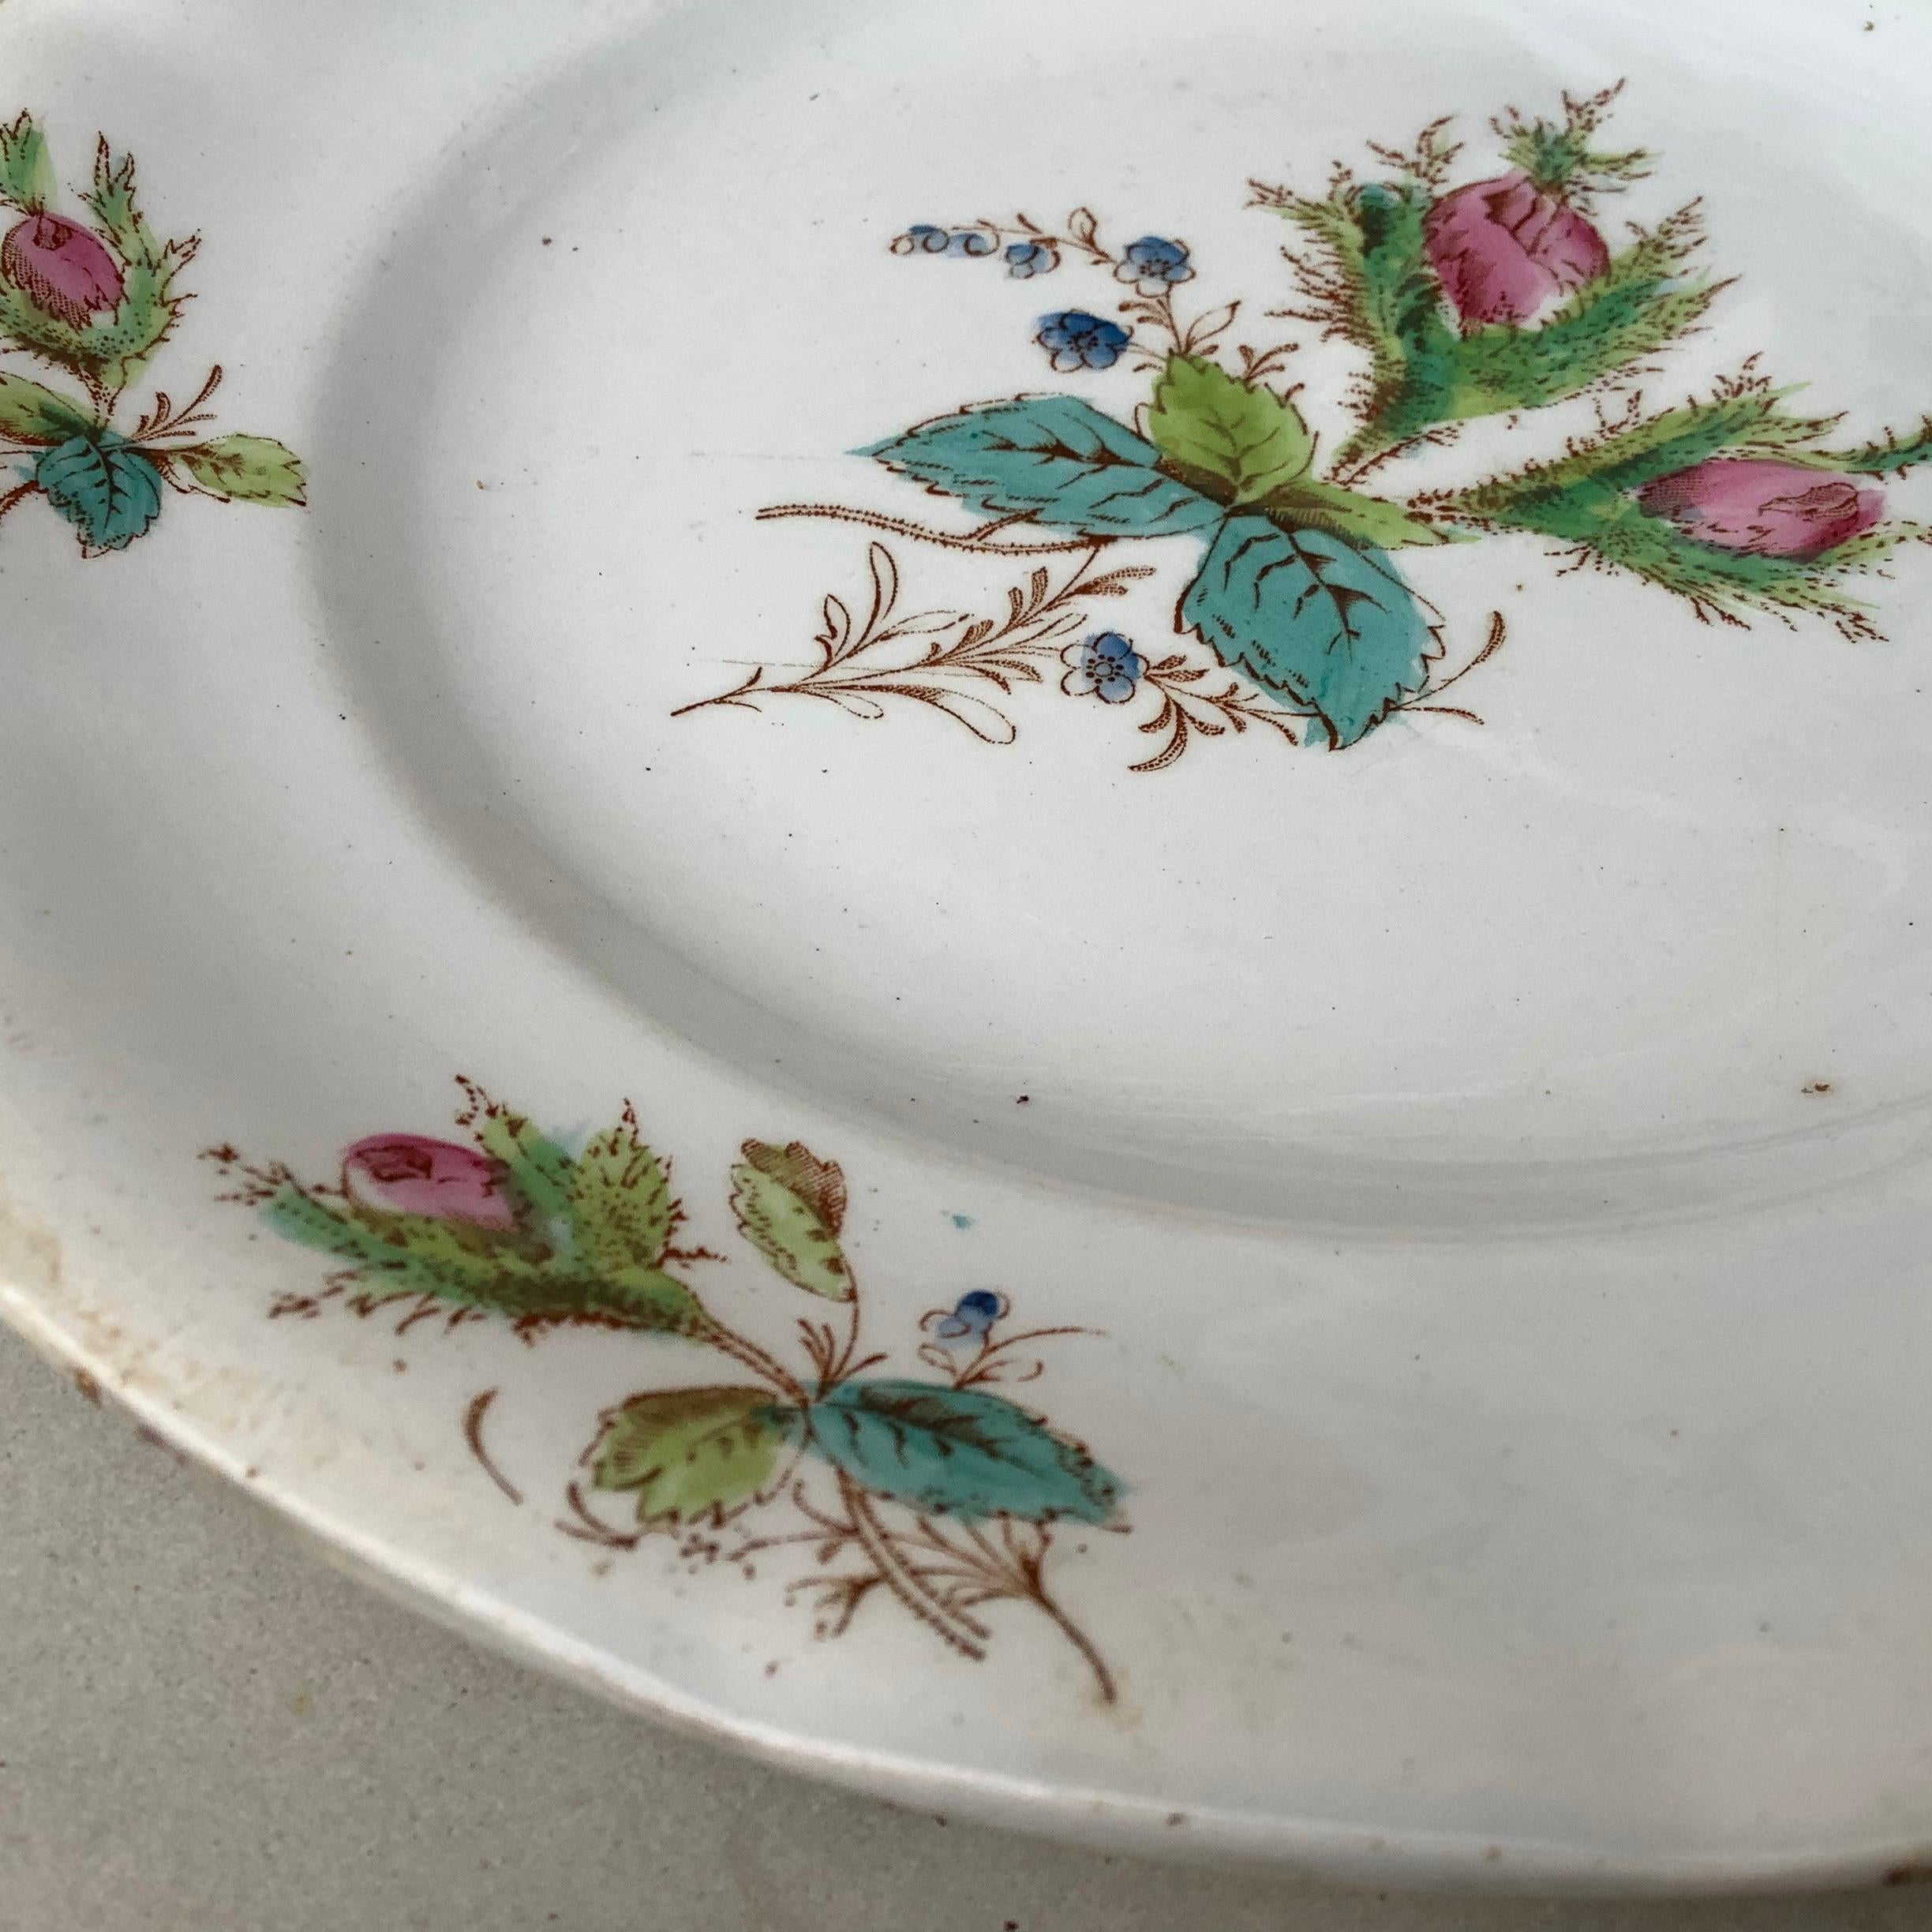 French Provincial Set of 3 Dessert Plates with Roses Keller & Guerin Luneville, circa 1900 For Sale